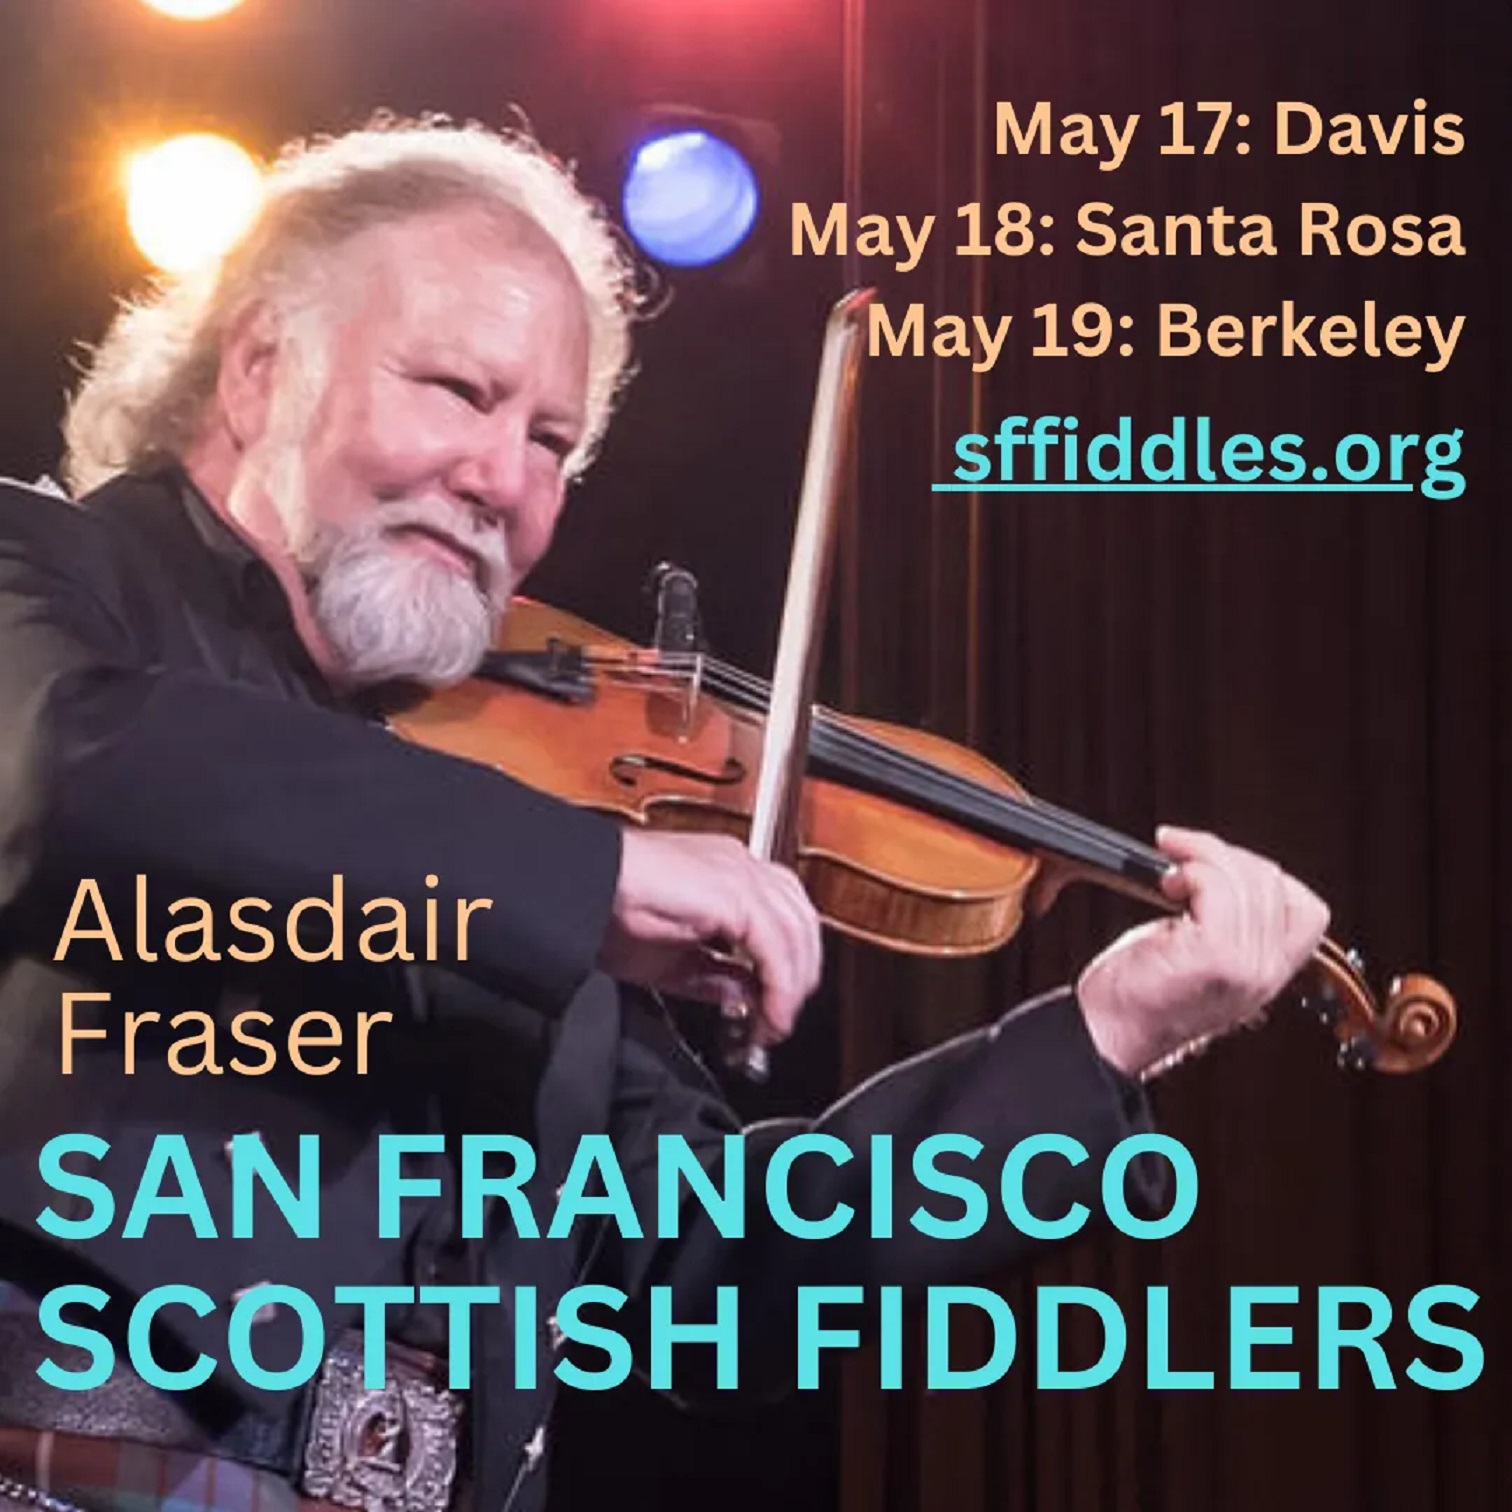 San Francisco Scottish Fiddlers starring Alasdair Fraser Announce 3 Upcoming Shows